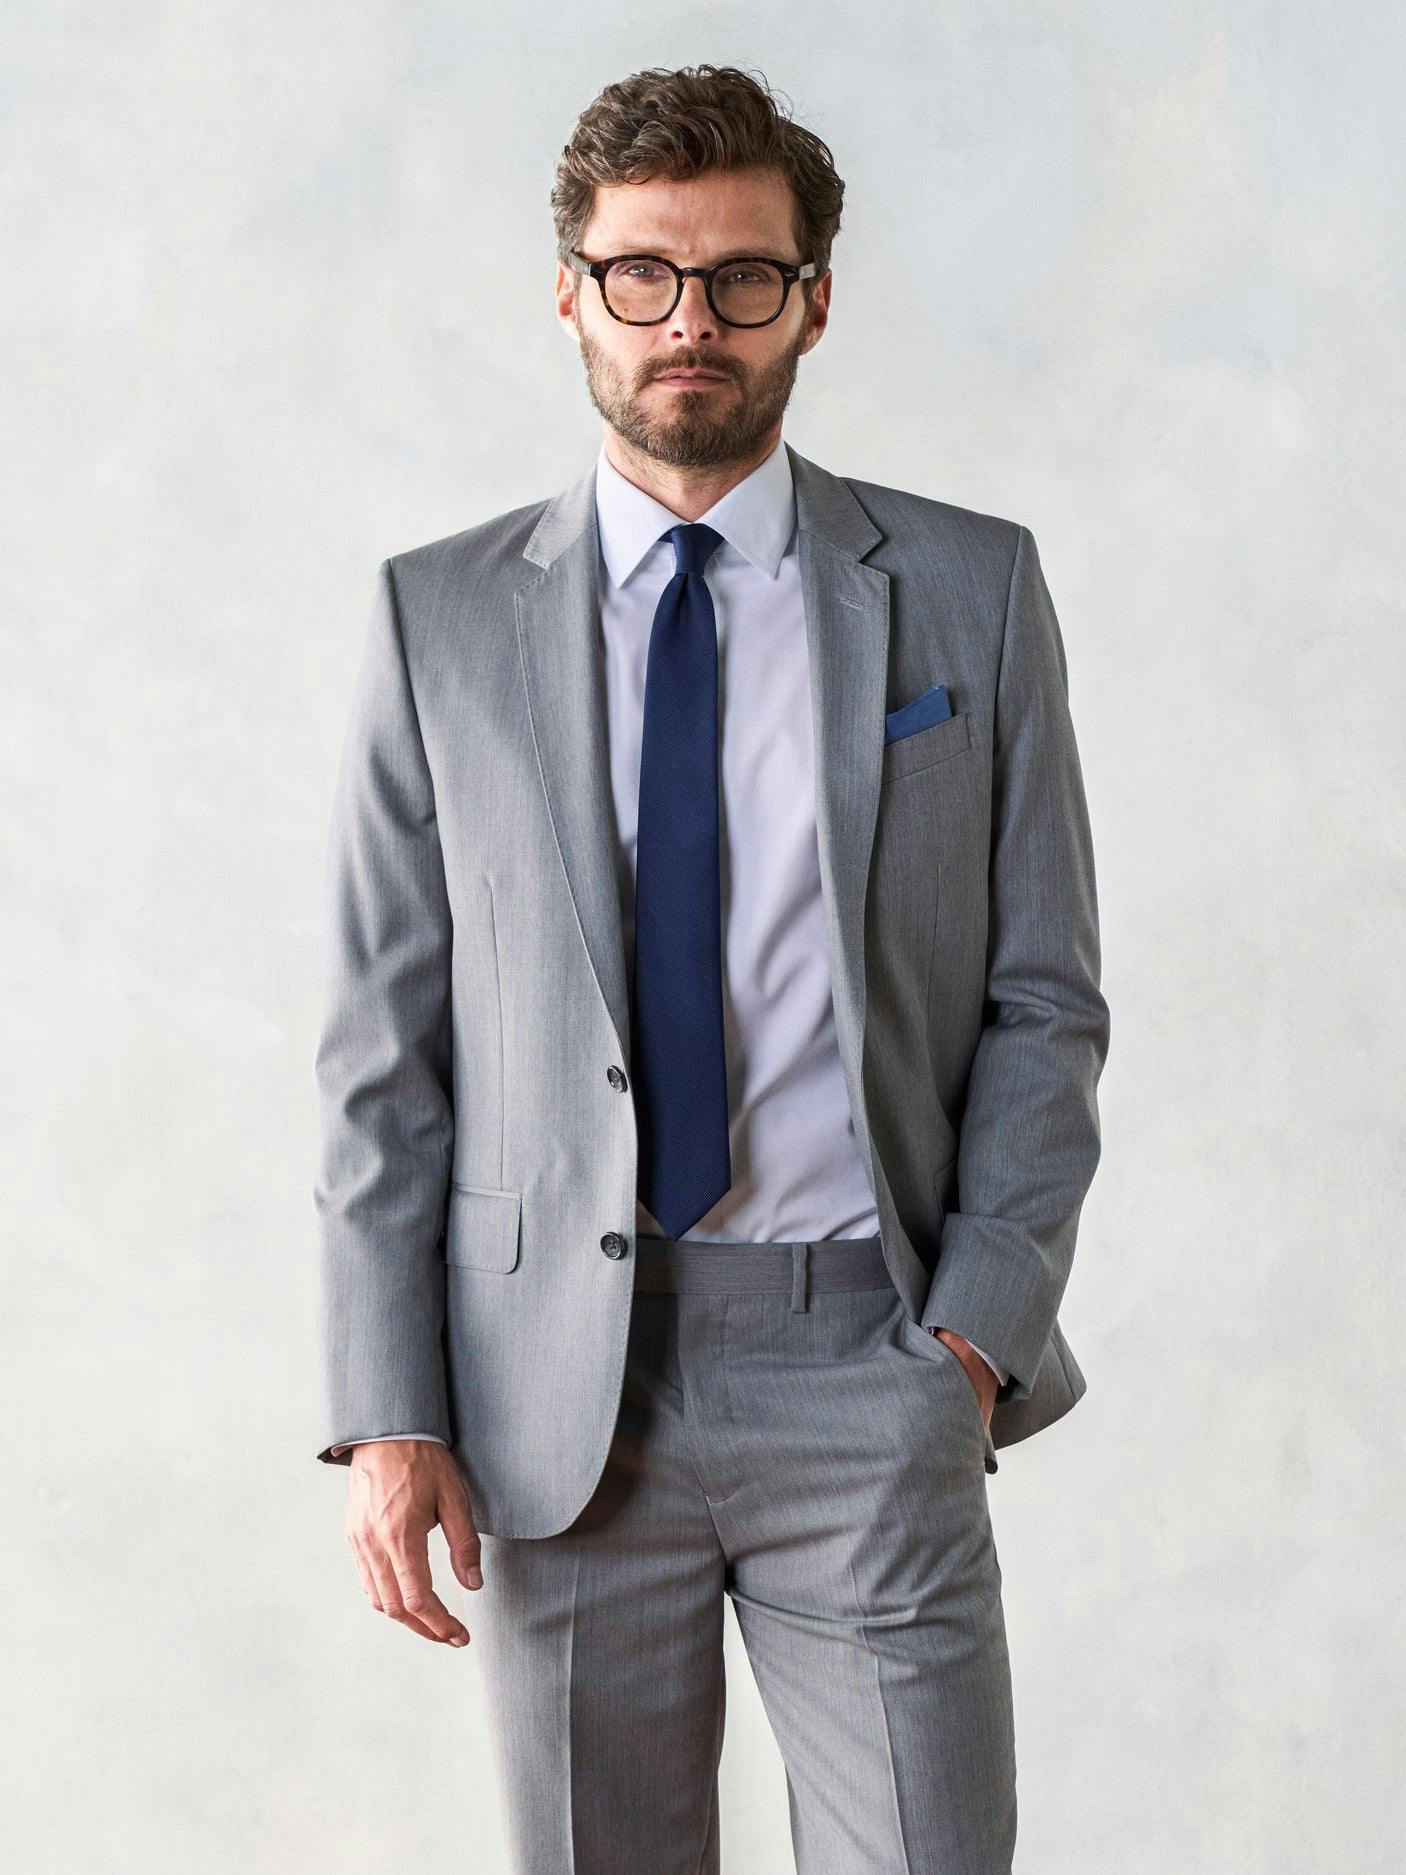 Like a cloud passing in front of the afternoon sun, this light grey suit provides the perfect shade to get you through any event in style. Includes jacket and pants. Pants are available in classic and slim fits.